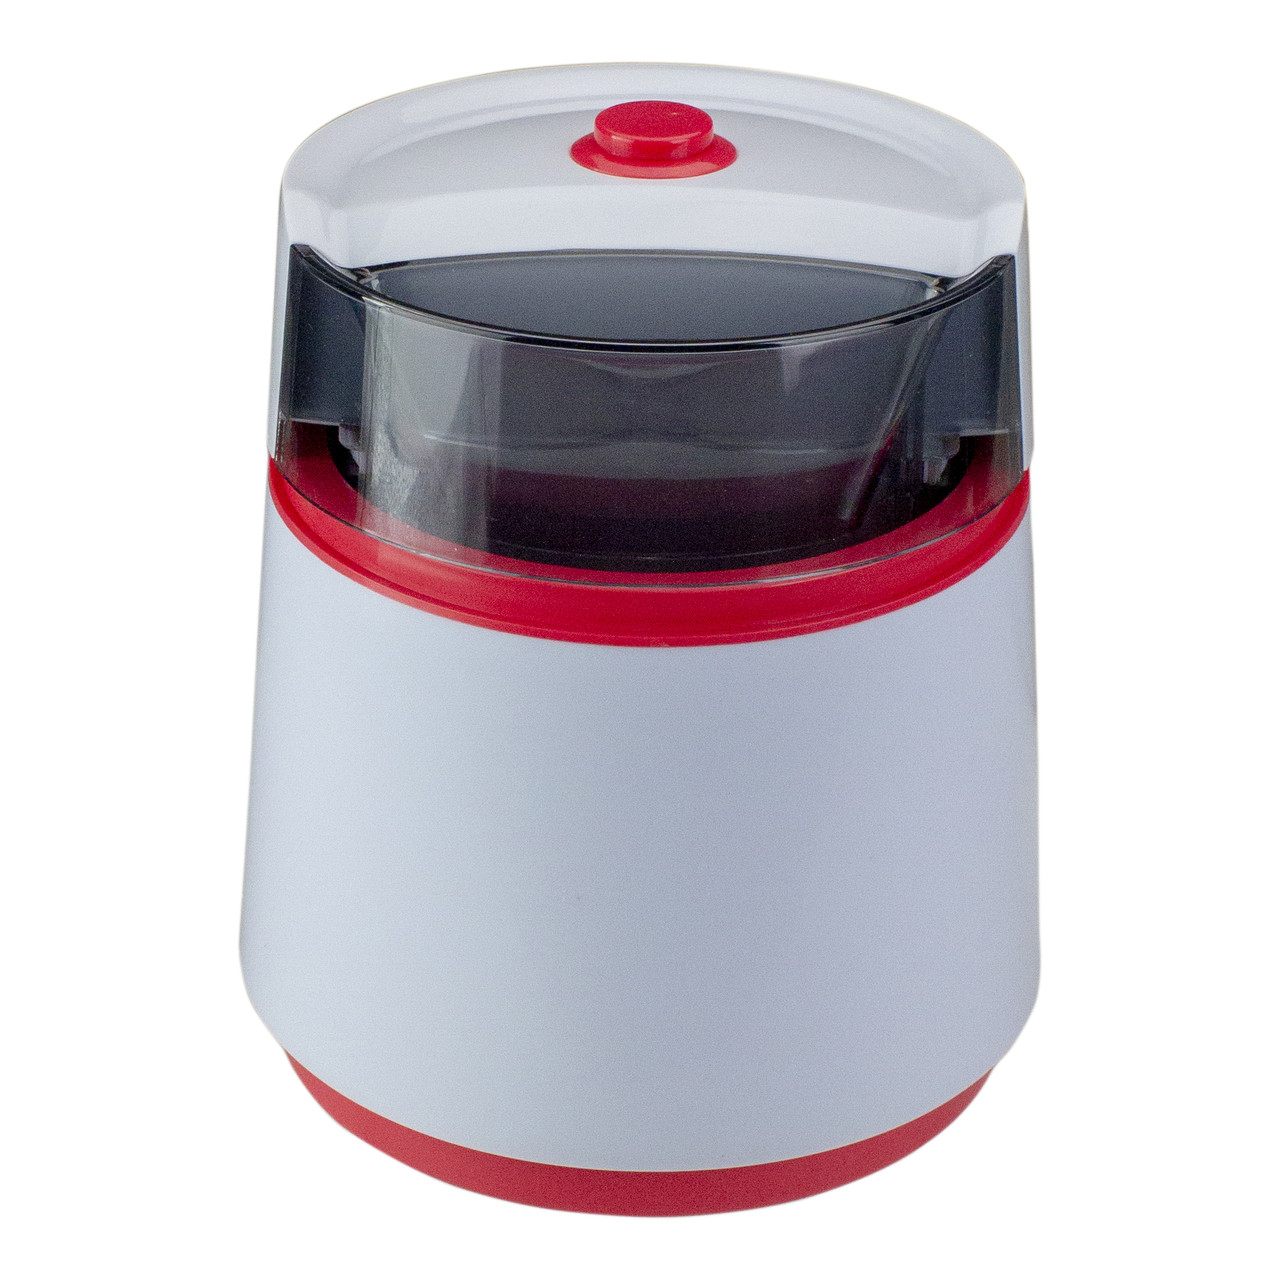 7.75 Black & Red Battery Operated Half Pint Ice Cream Maker